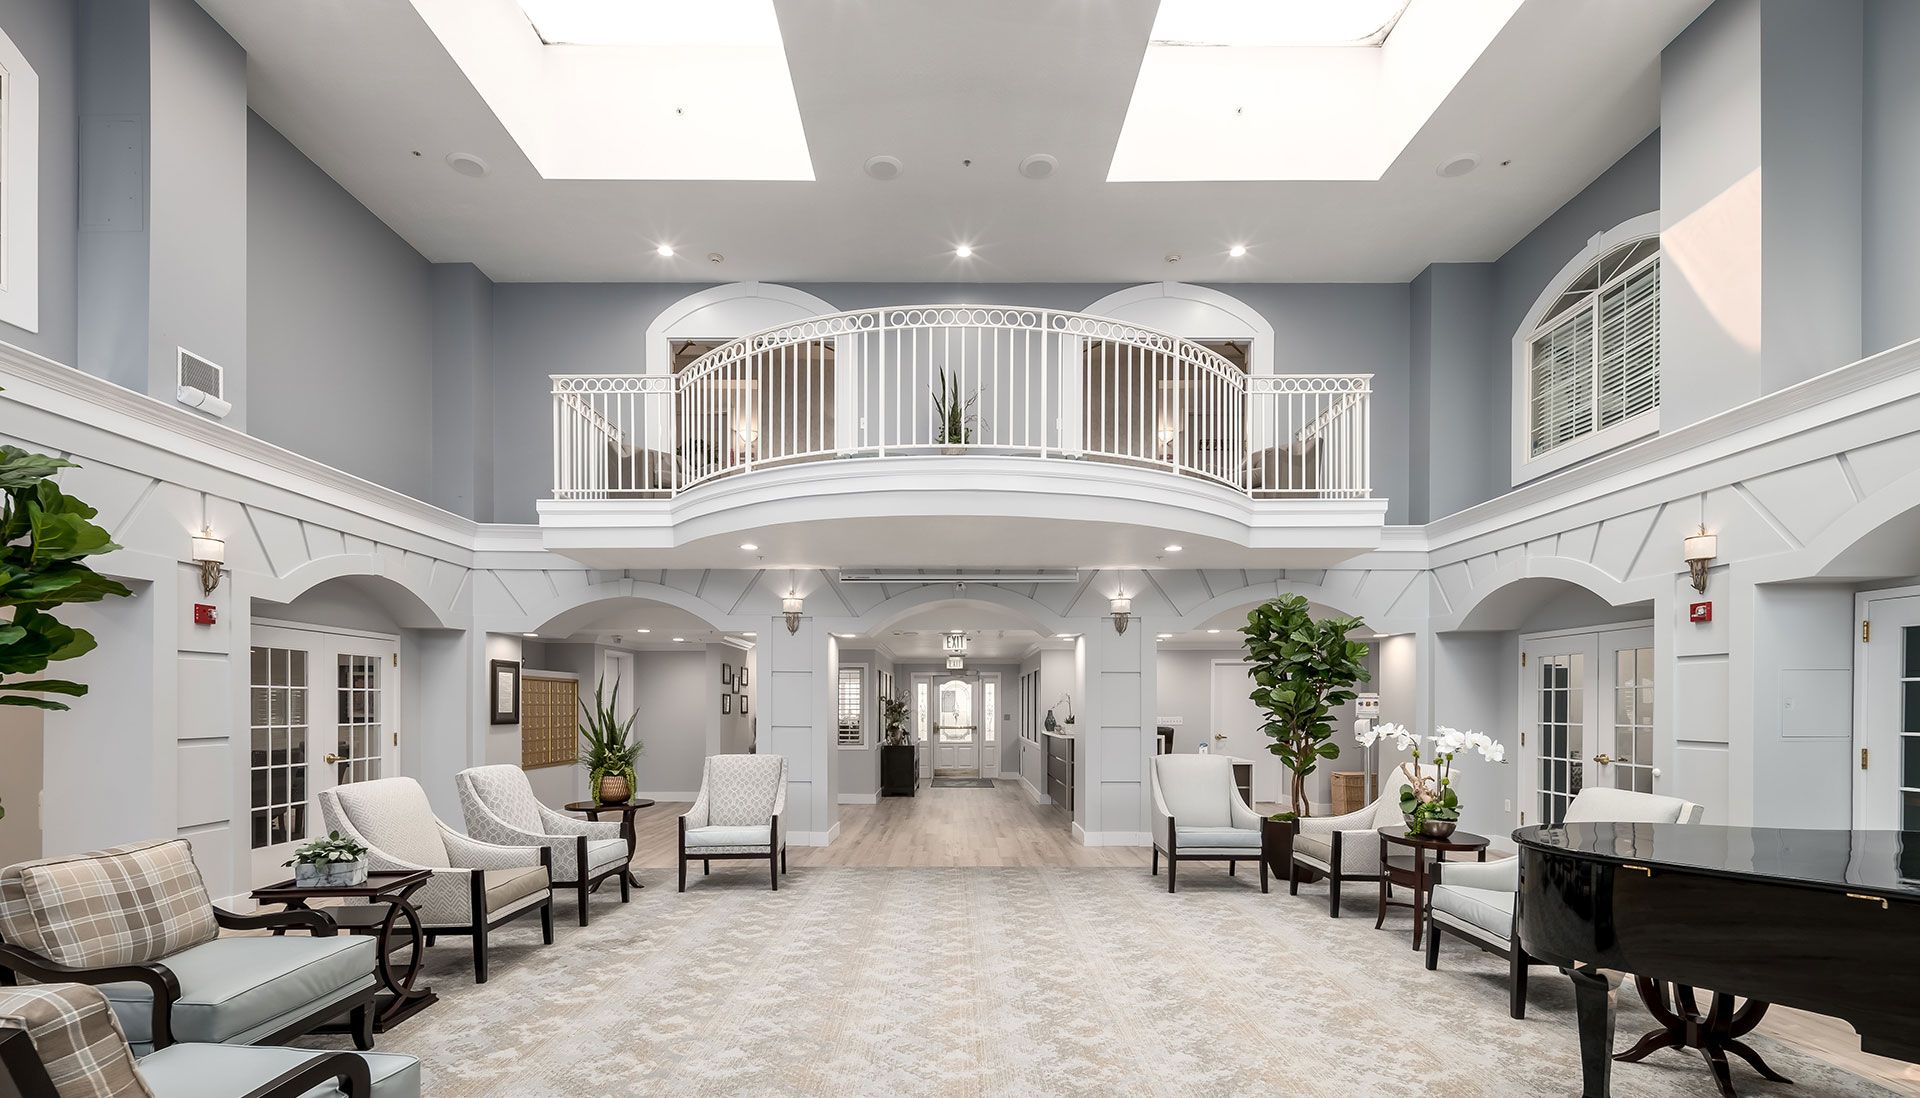 Front entrance area with a piano, balcony, and formal seating